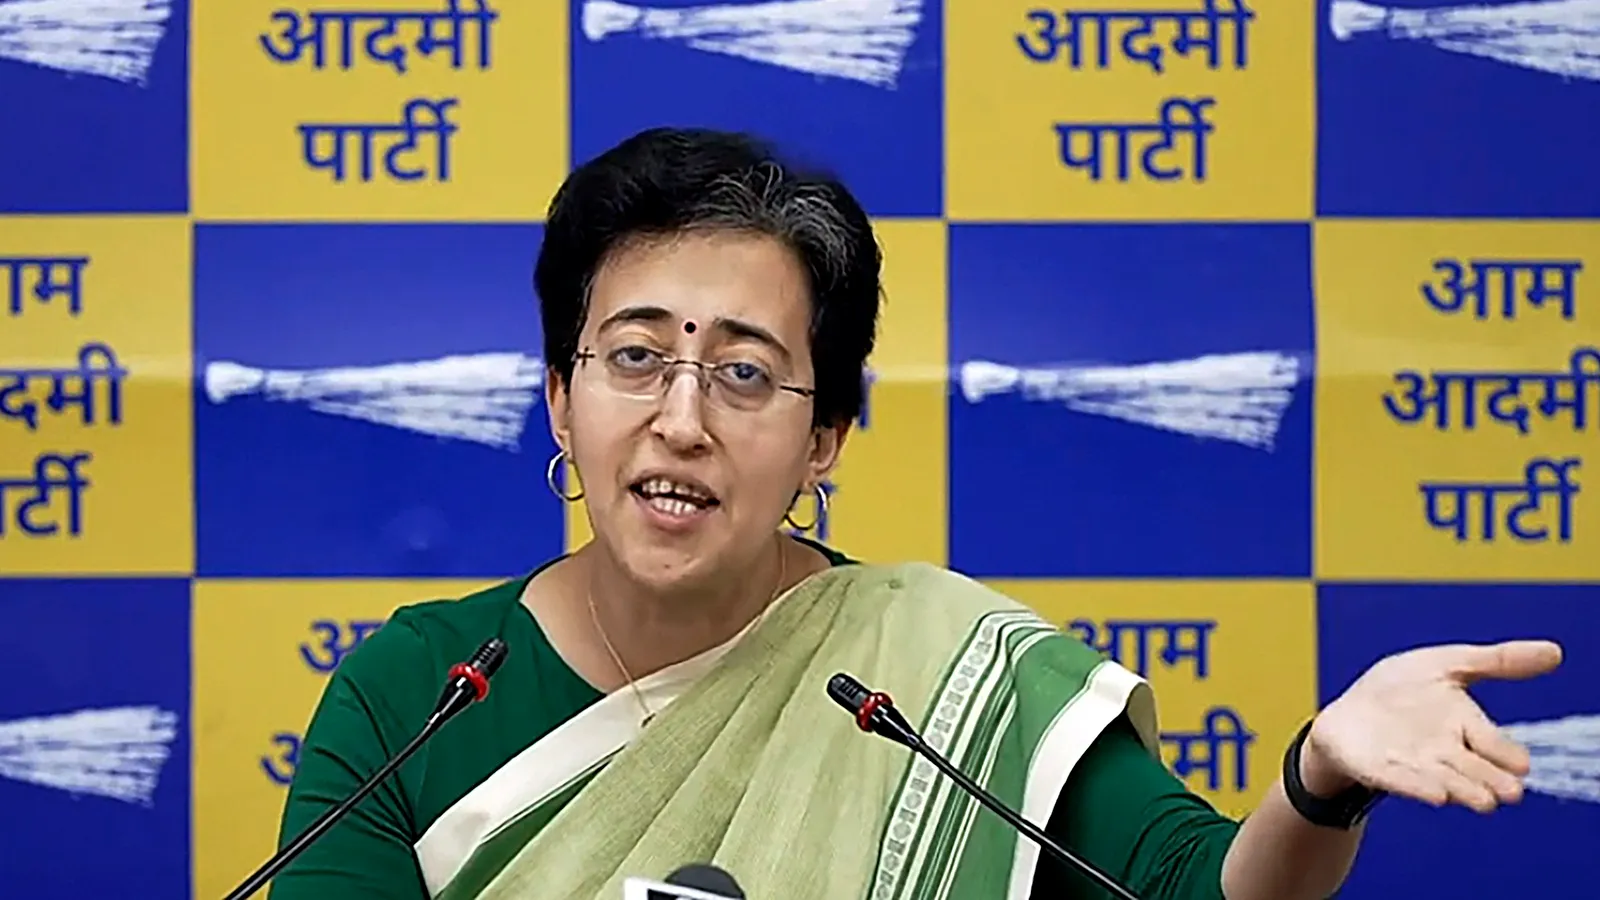 AAP leader Atishi gets EC notice over her ‘join BJP or face jail’ remark